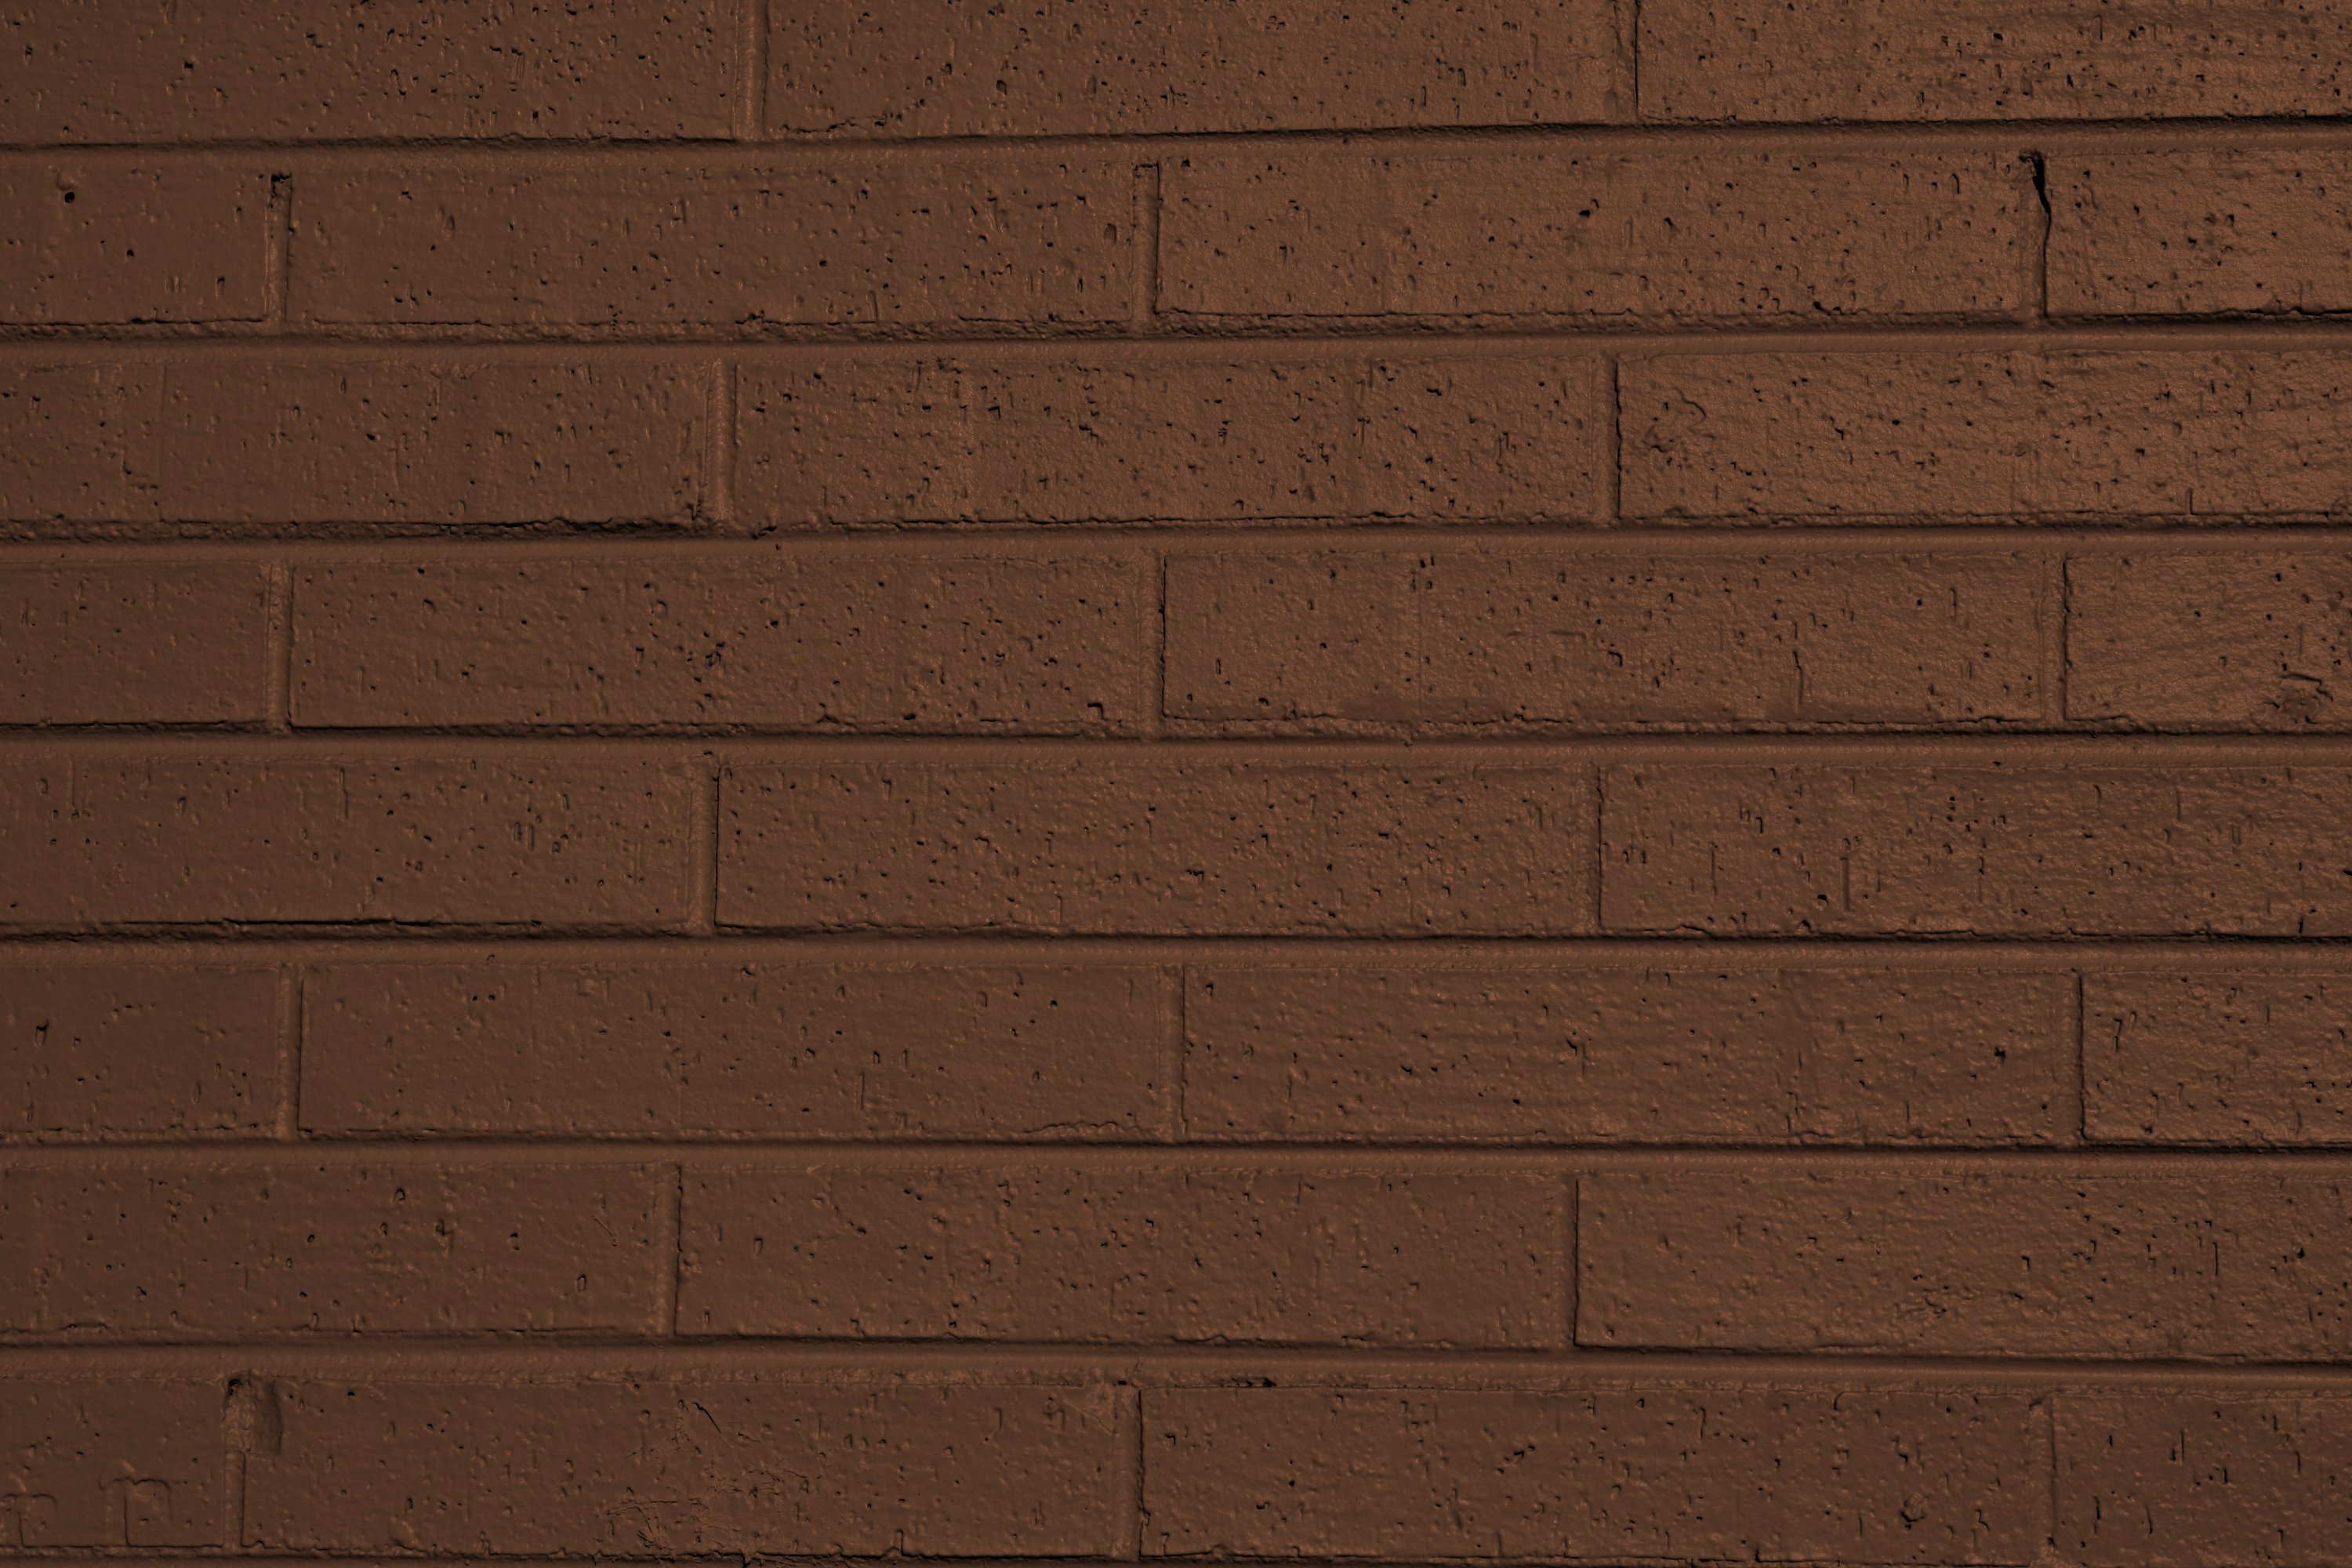 Brown Painted Brick Wall Texture Picture Photograph Photos